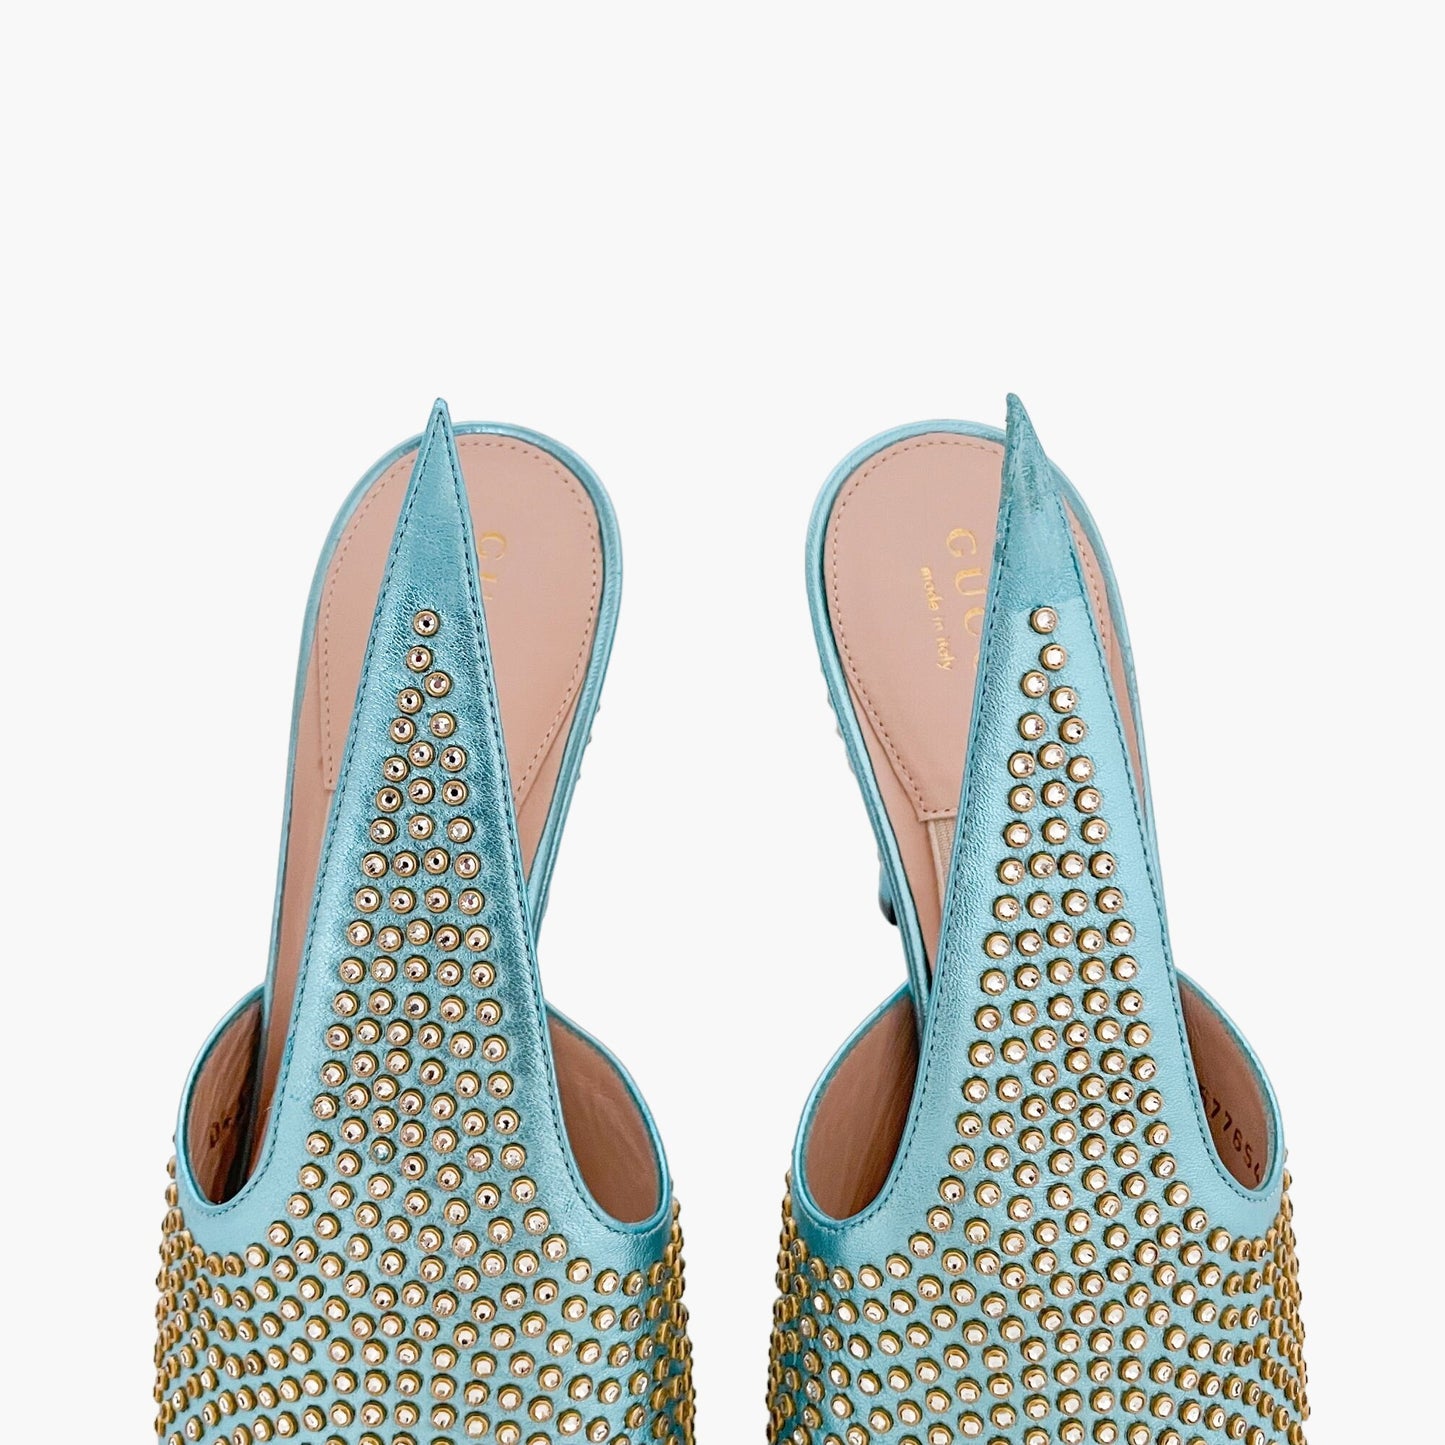 Gucci Fedra Crystal-Embellished Mules in Cielo (Metallic Blue) Size 37